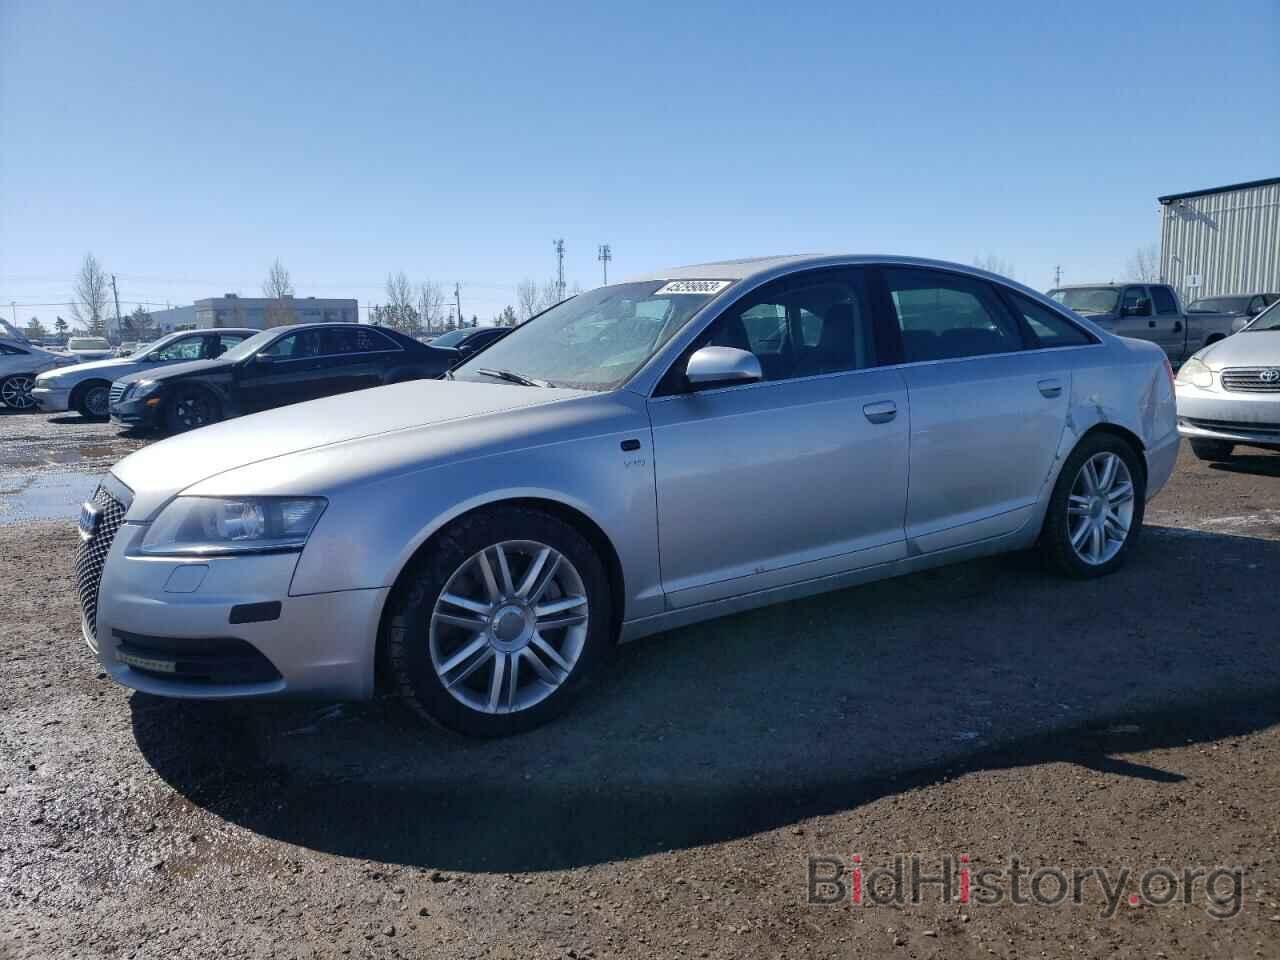 Photo WAUGN74F77N130312 - AUDI S6/RS6 2007